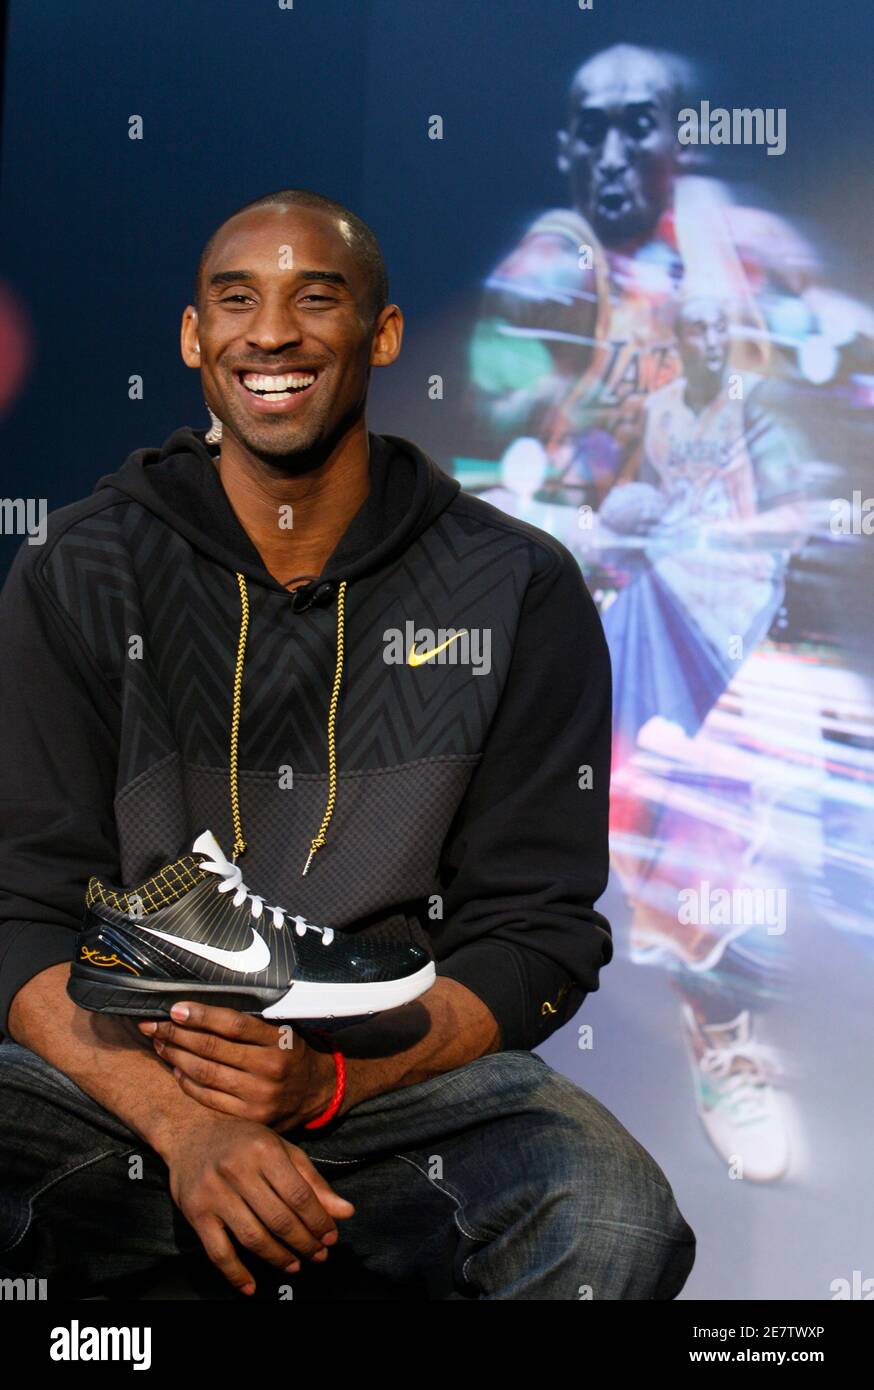 Los Angeles Lakers NBA star Kobe Bryant speaks at a webcast to unveil his  new Nike Zoom Kobe IV basketball shoe in Los Angeles, December 11, 2008.  The shoe will be available